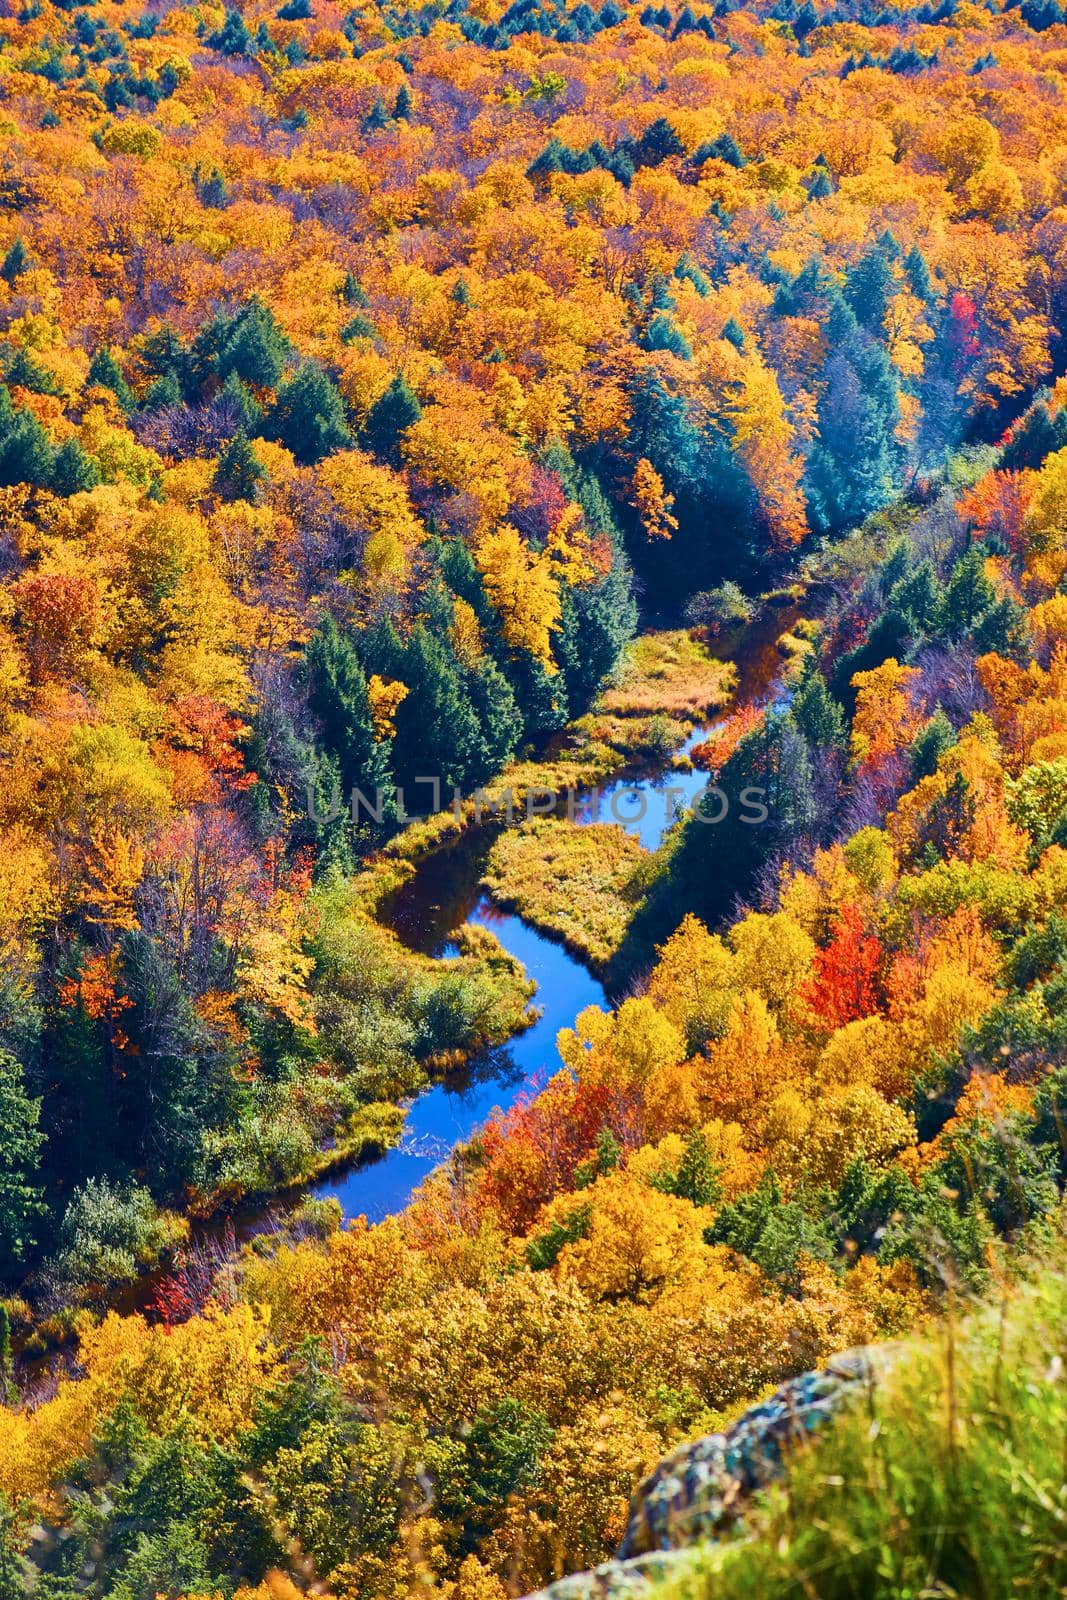 Image of Winding river withing a forest during fall